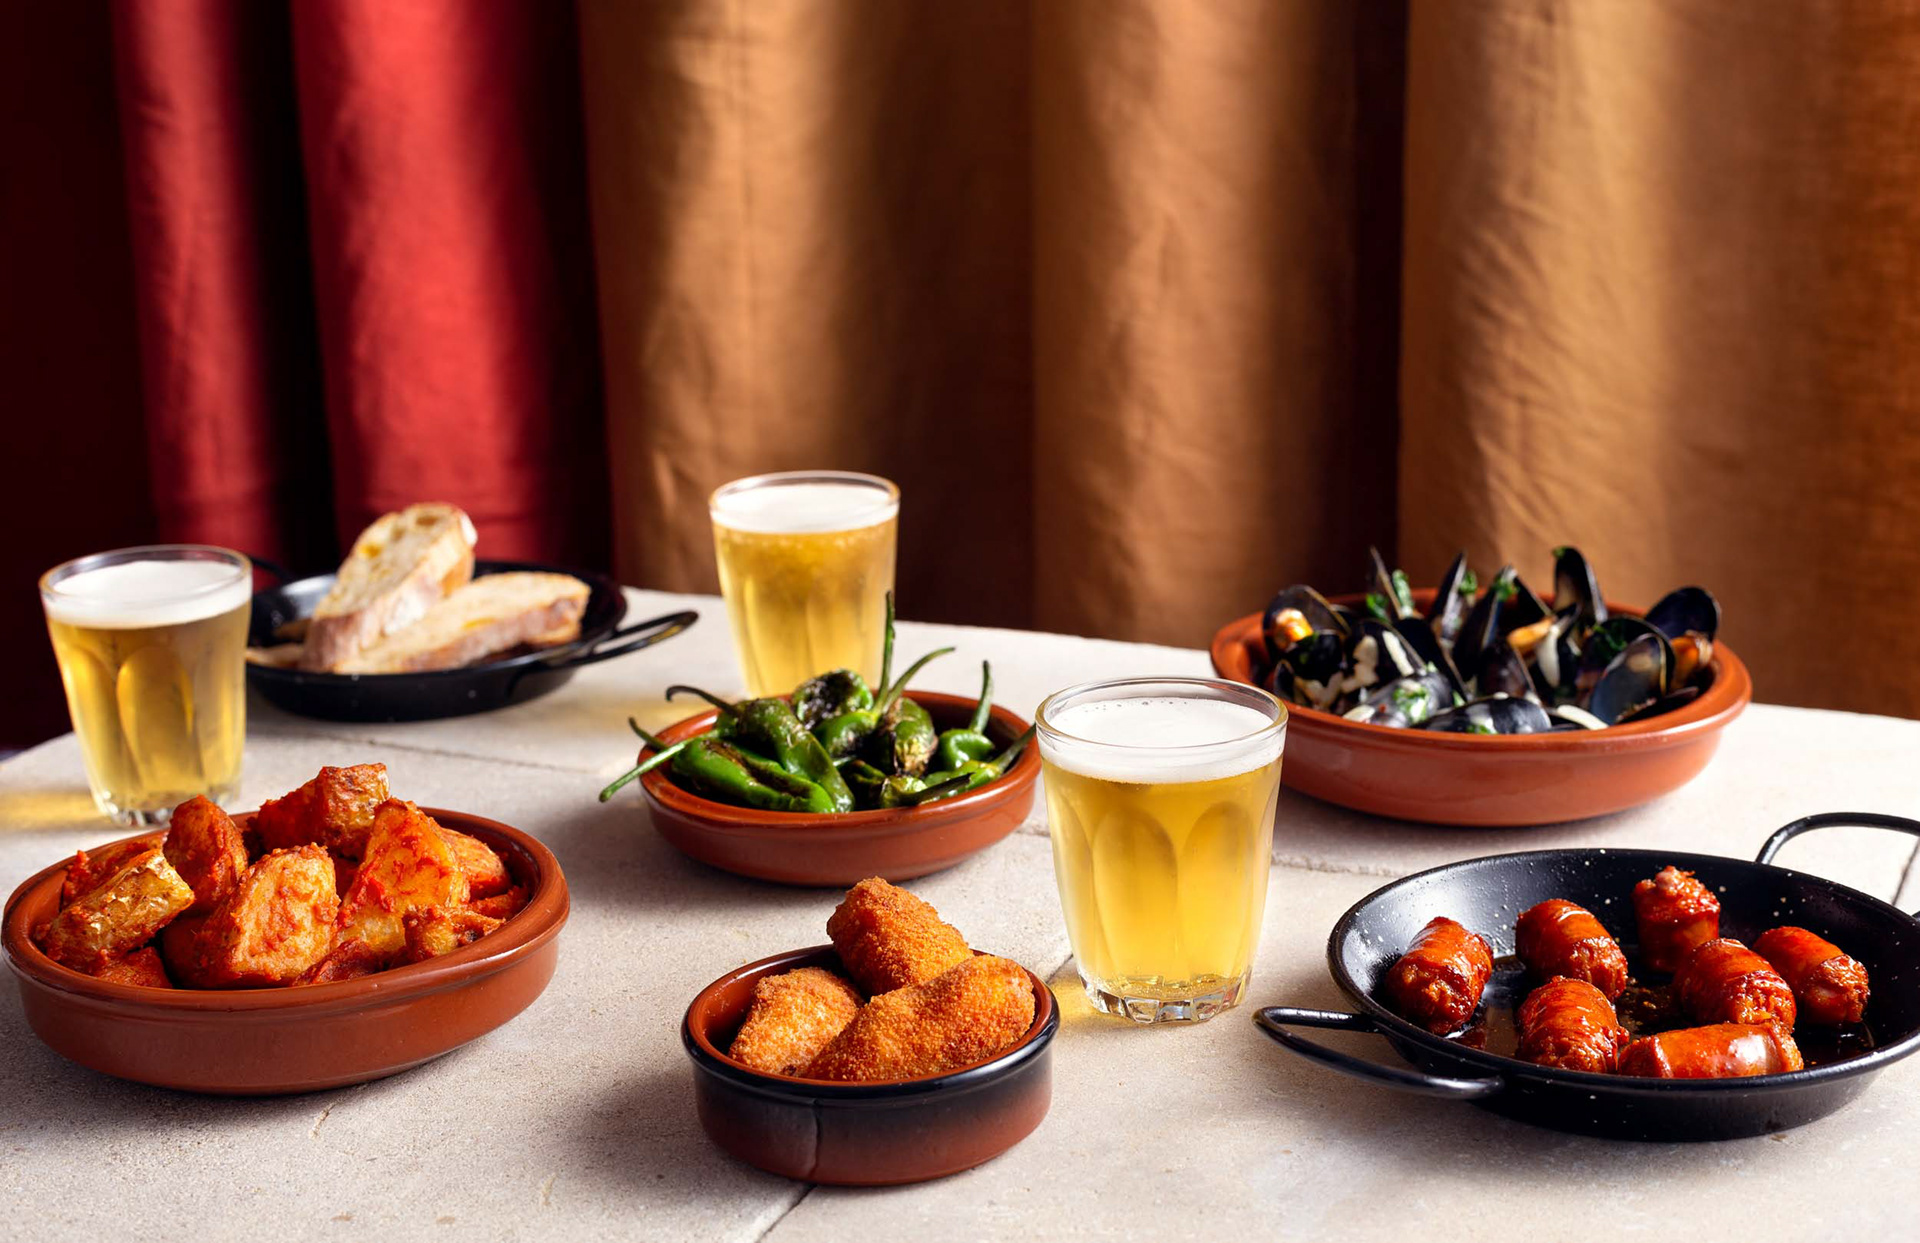 'Dine Smarter, Not Harder': The Tapas Rule You Need To Know Before Going To Spain